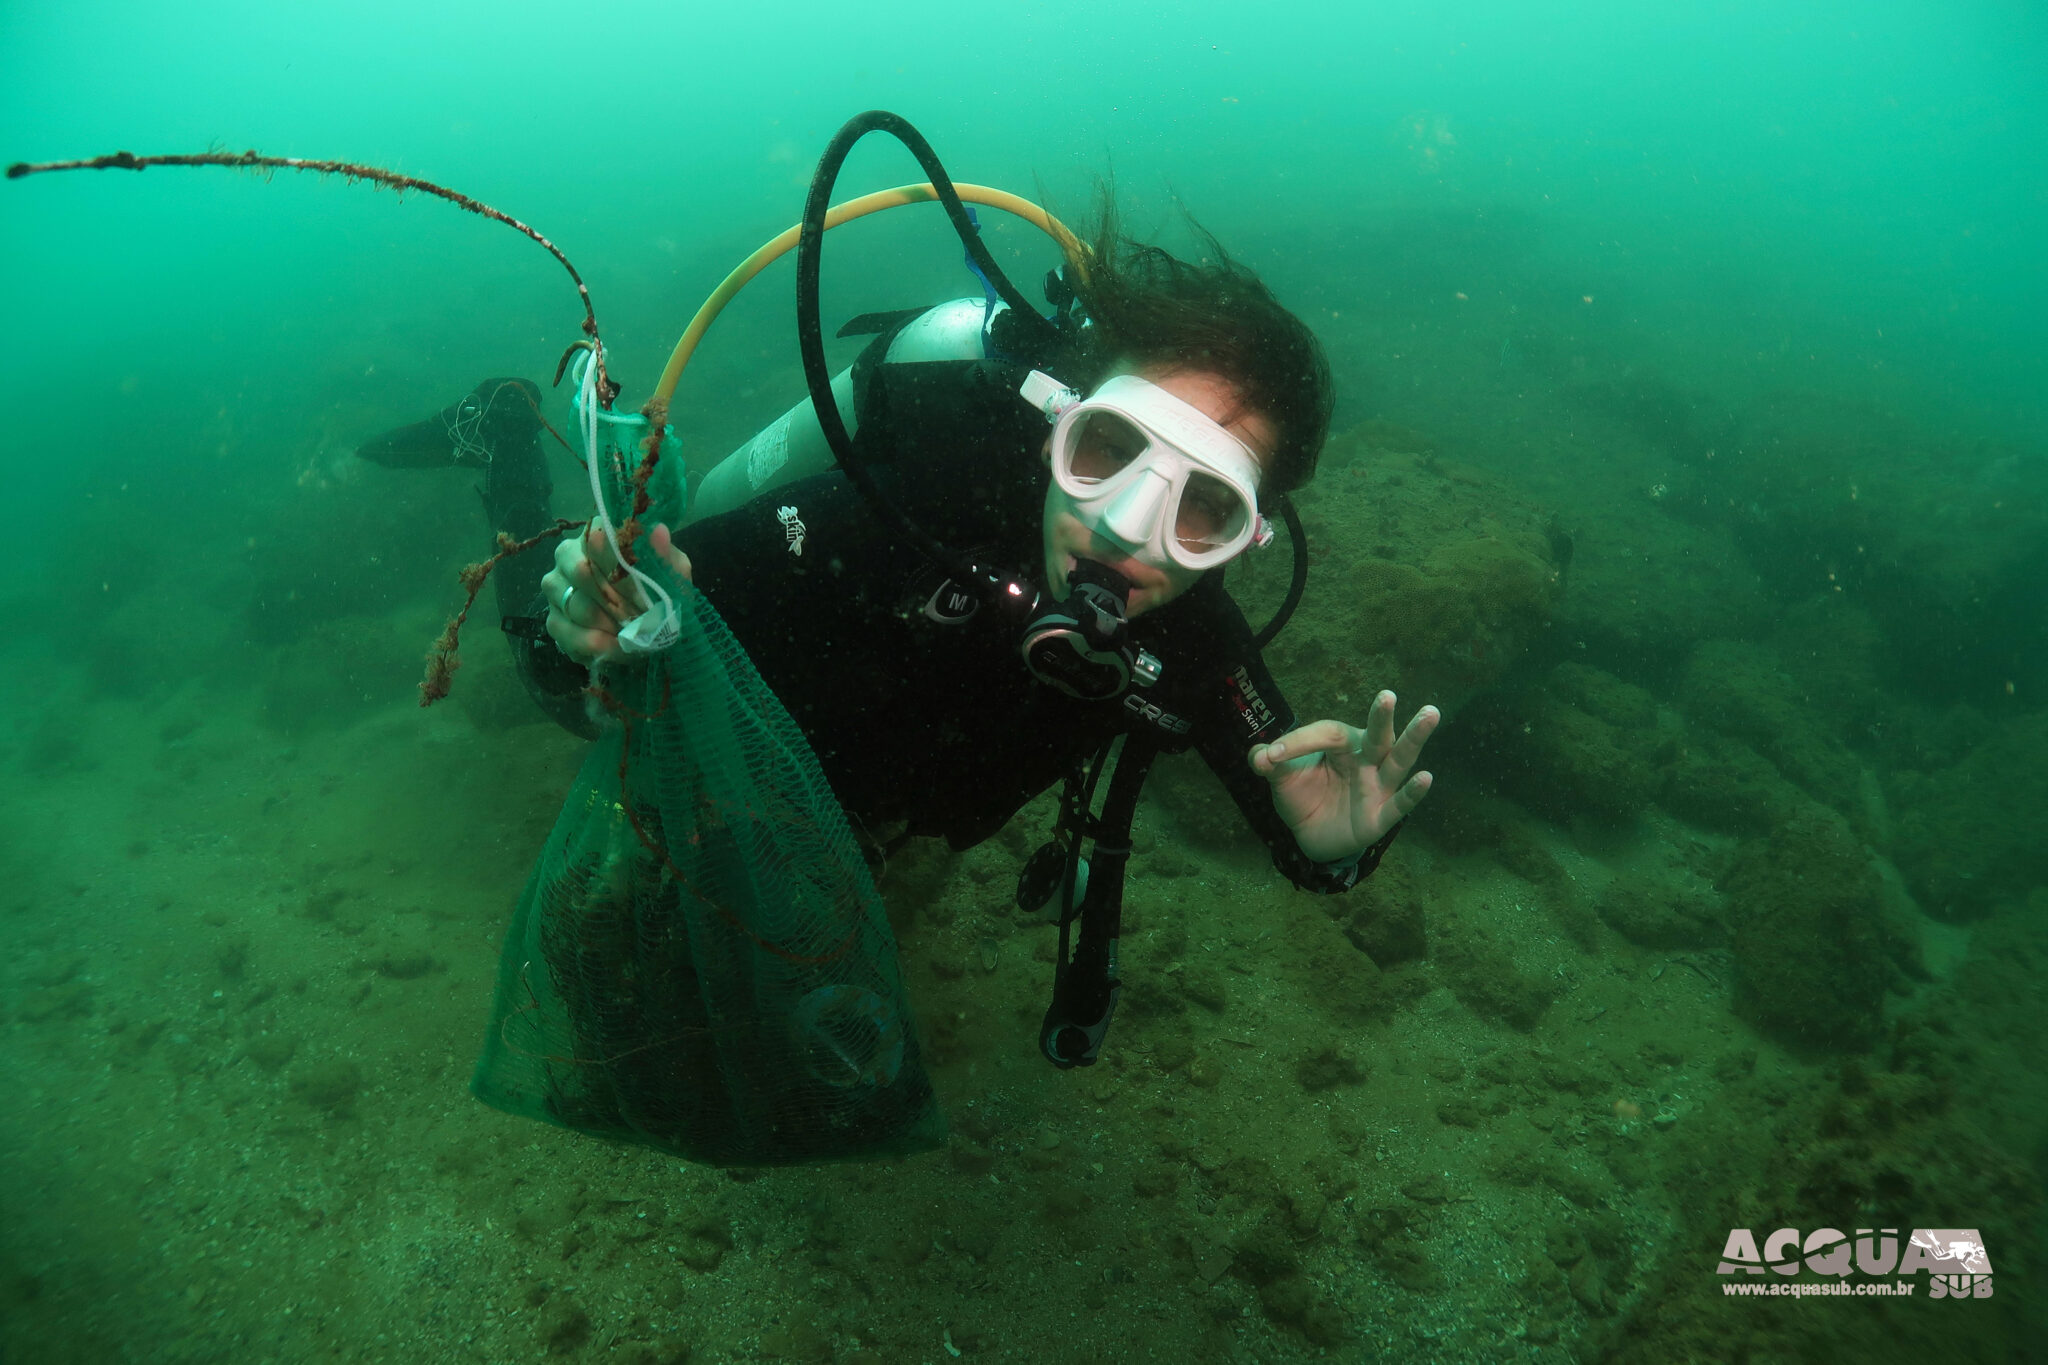 A diver gives the "okay" signal while holding a bag of debris collected from the ocean floor.